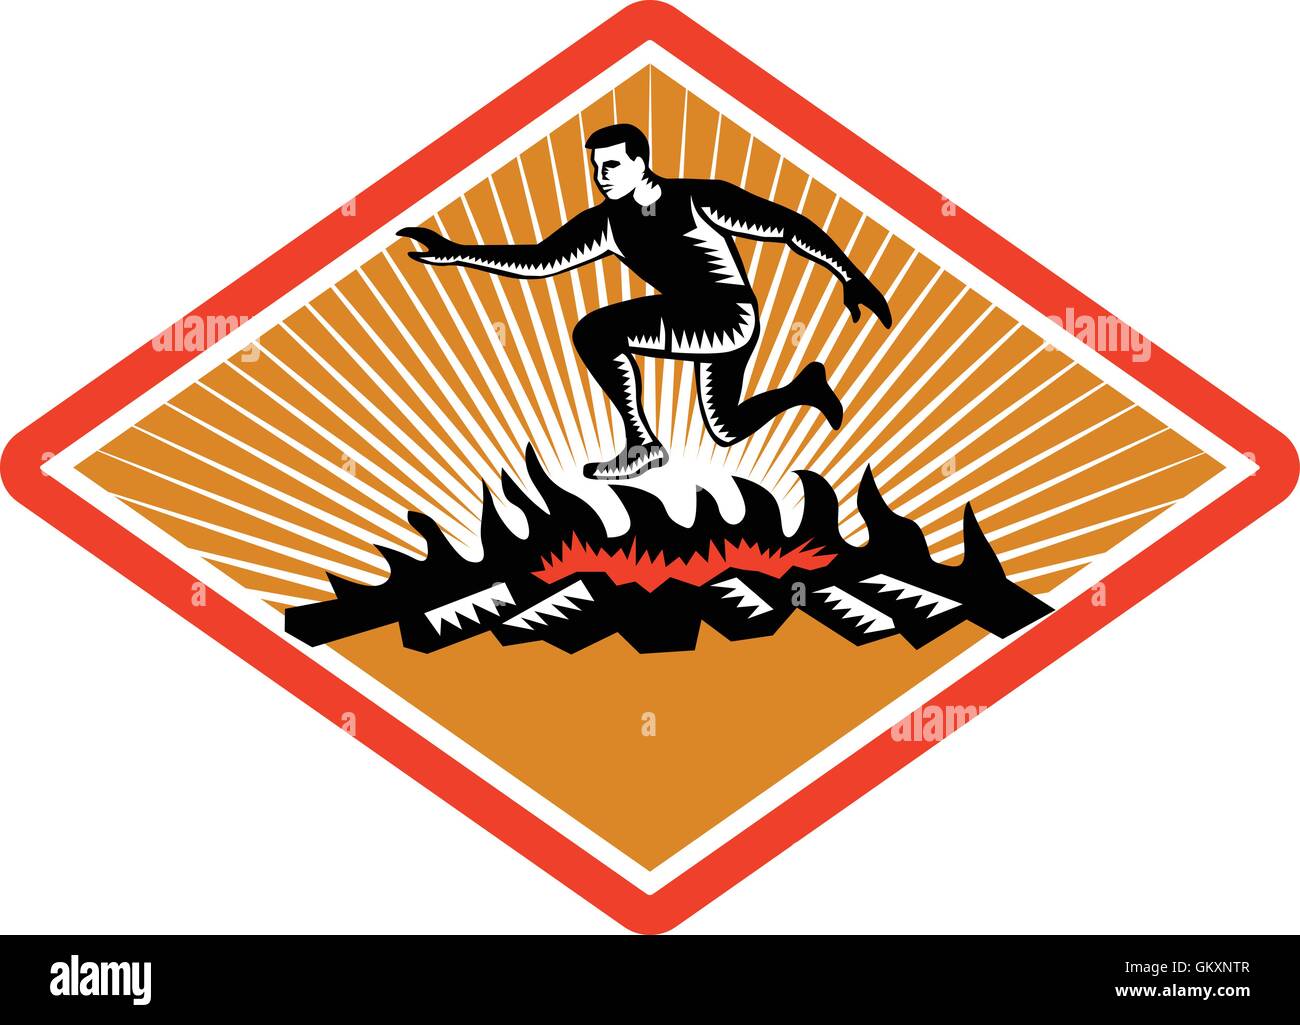 Obstacle Racing Jumping Fire Woodcut Stock Vector